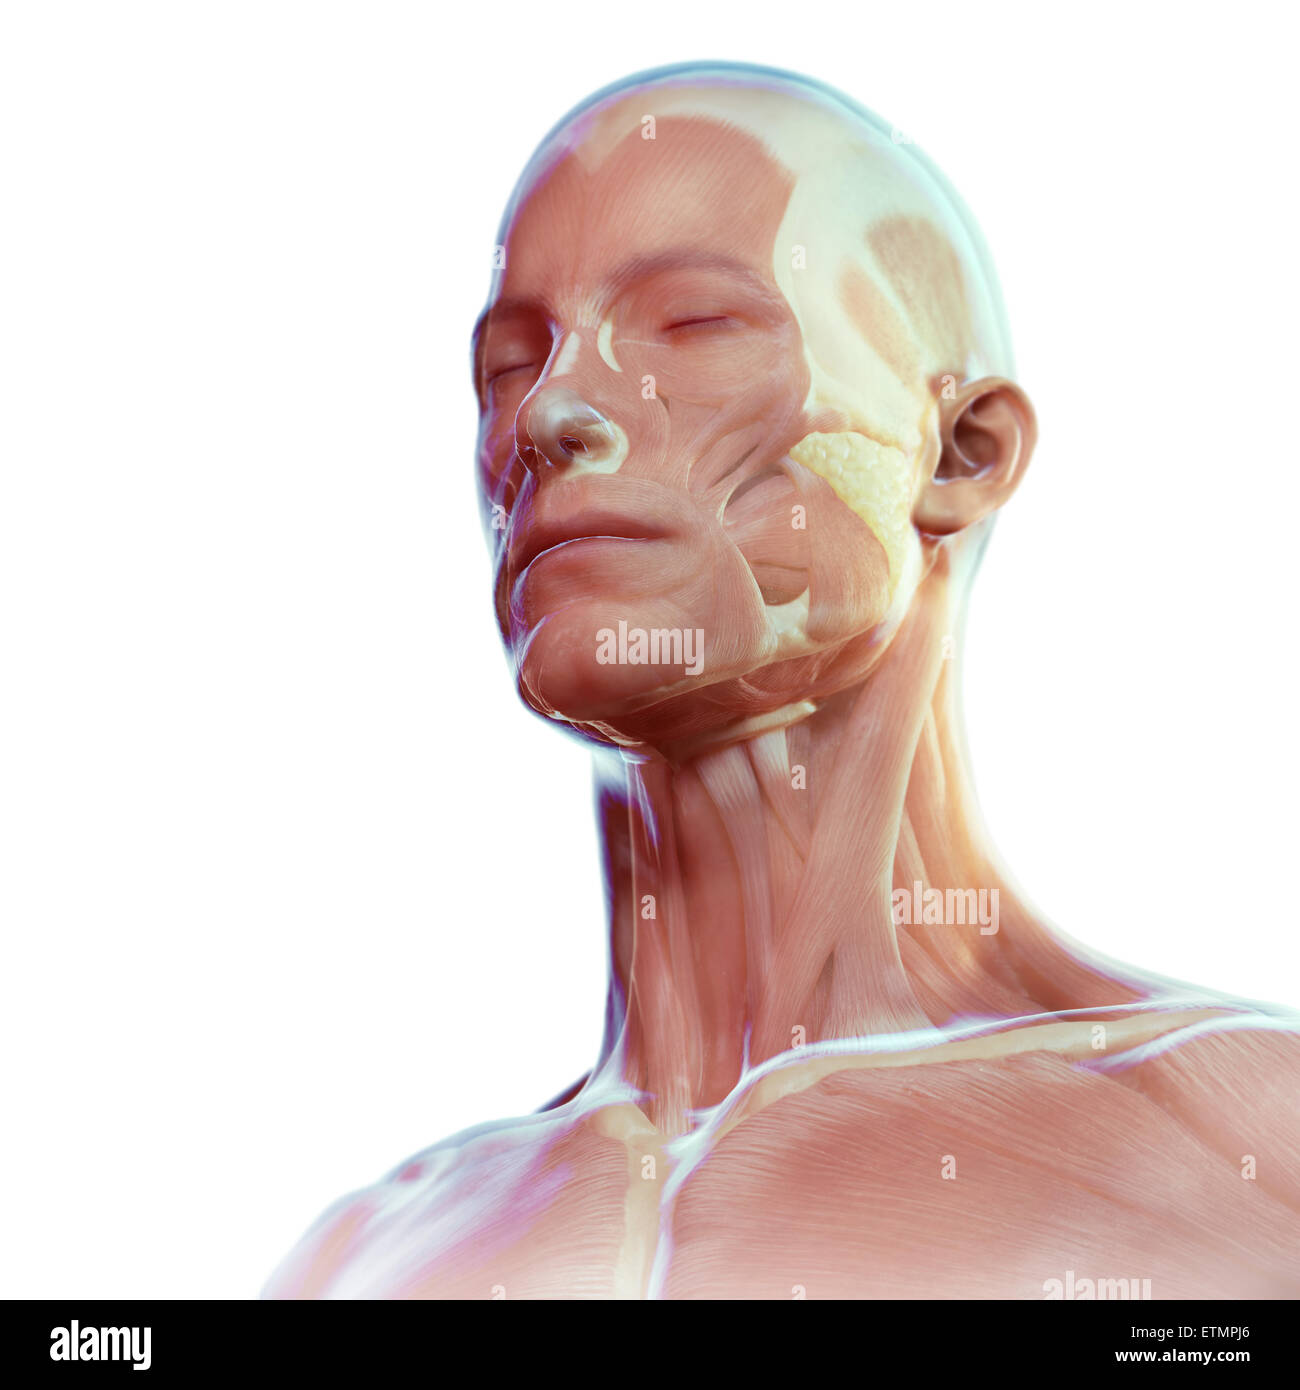 Conceptual image of the face with the musculature visible under the skin. Stock Photo